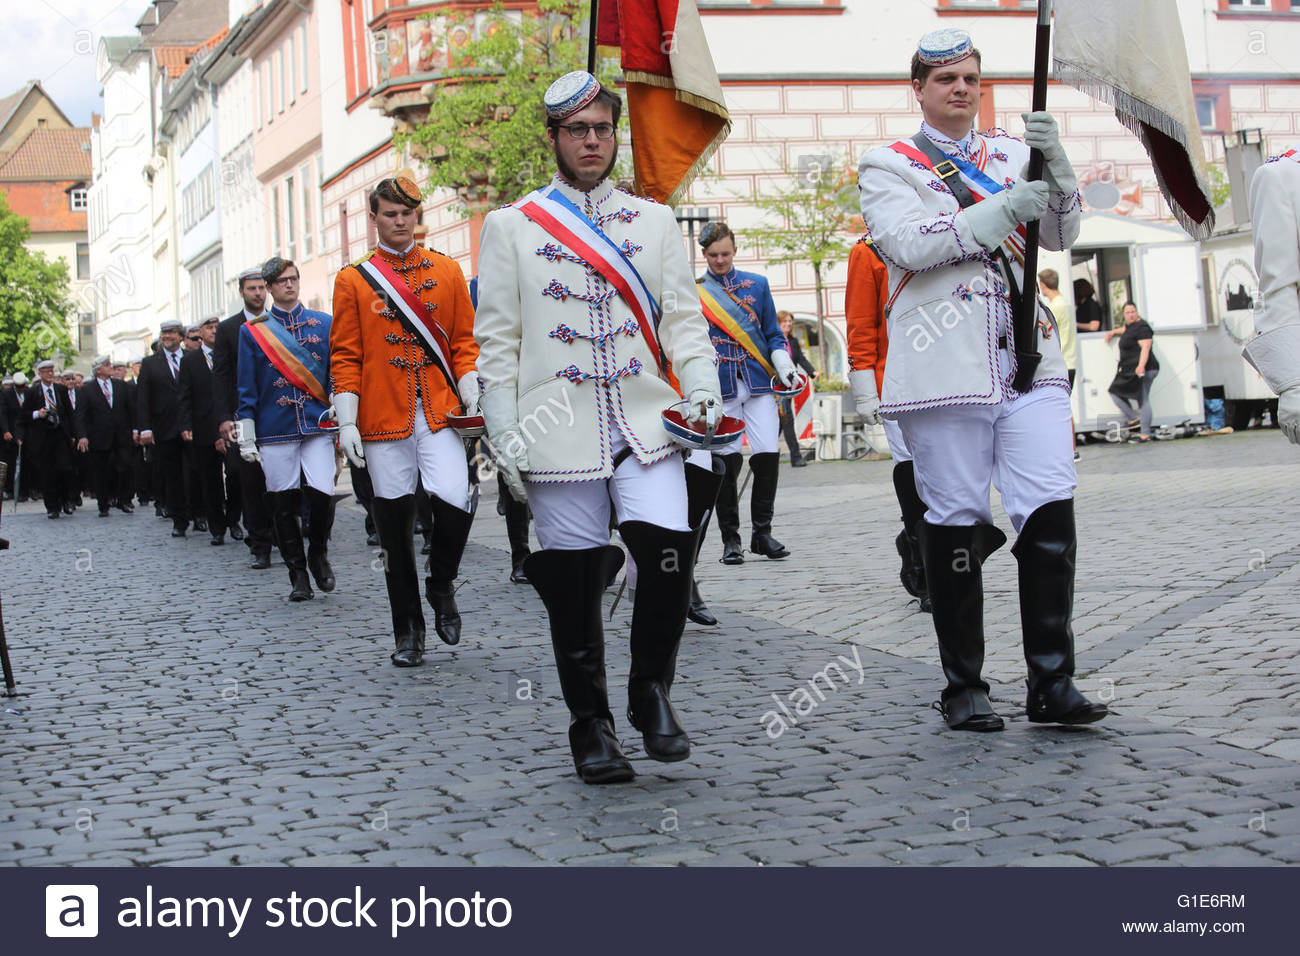 Coburg, Germany. 13th May, 2016. The annual Coburg Convent weekend has begun with a parade through the town. Each Whitsun student associations gather in Coburg in Bavaria to celebrate the tradition of young students' associations which today encompasses about 100 separate organisations and has an overall membership of around 10,000 members. Credit:  reallifephotos/Alamy Live News Stock Photo